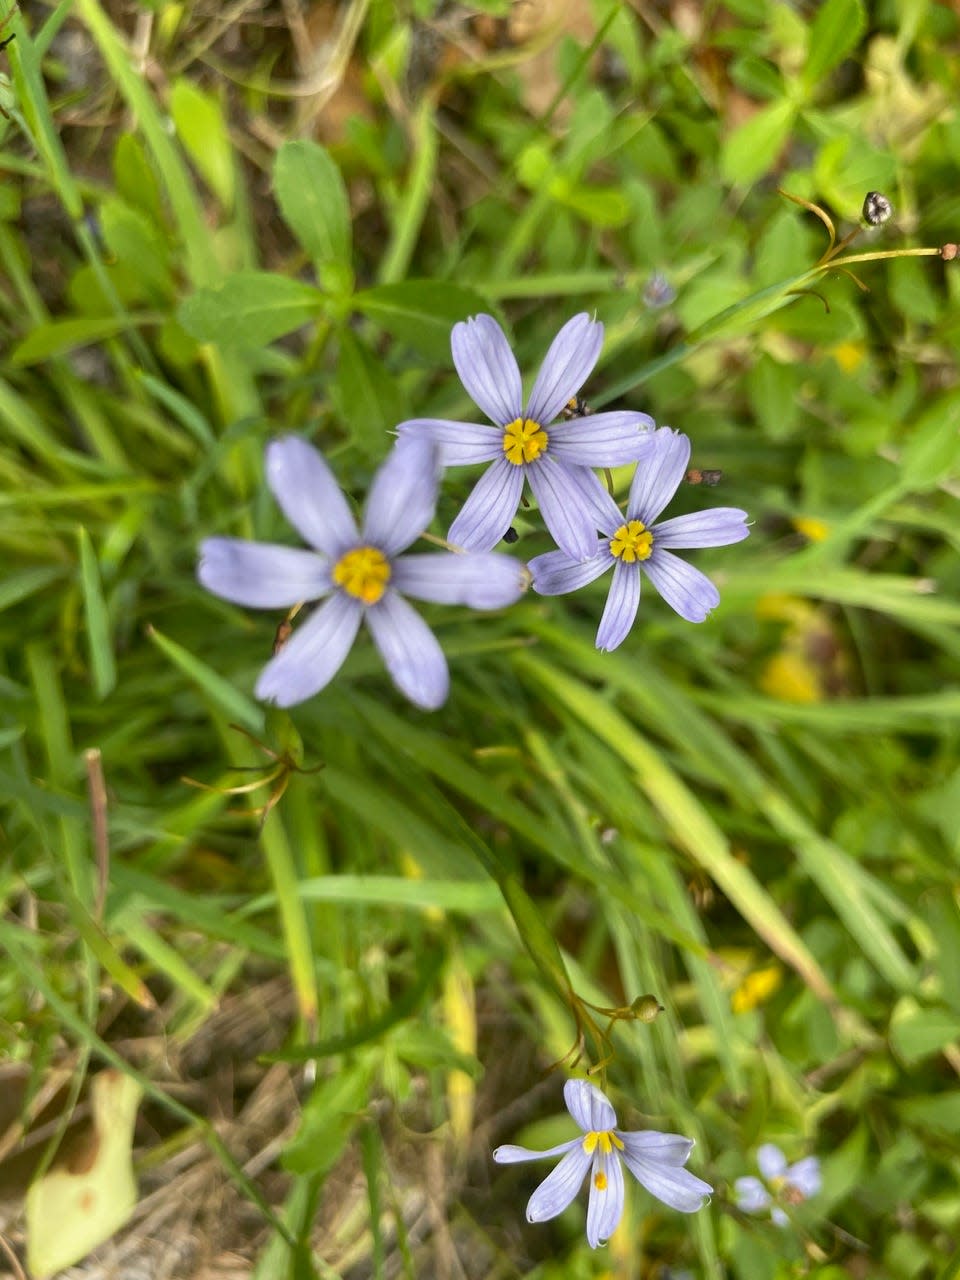 Blue-eyed grass is also blooming on the island. The flower blooms a star-shaped flower that opens in the morning to reveal six pale blueish-purple petals and a yellow center and then will close in the afternoon or evening.